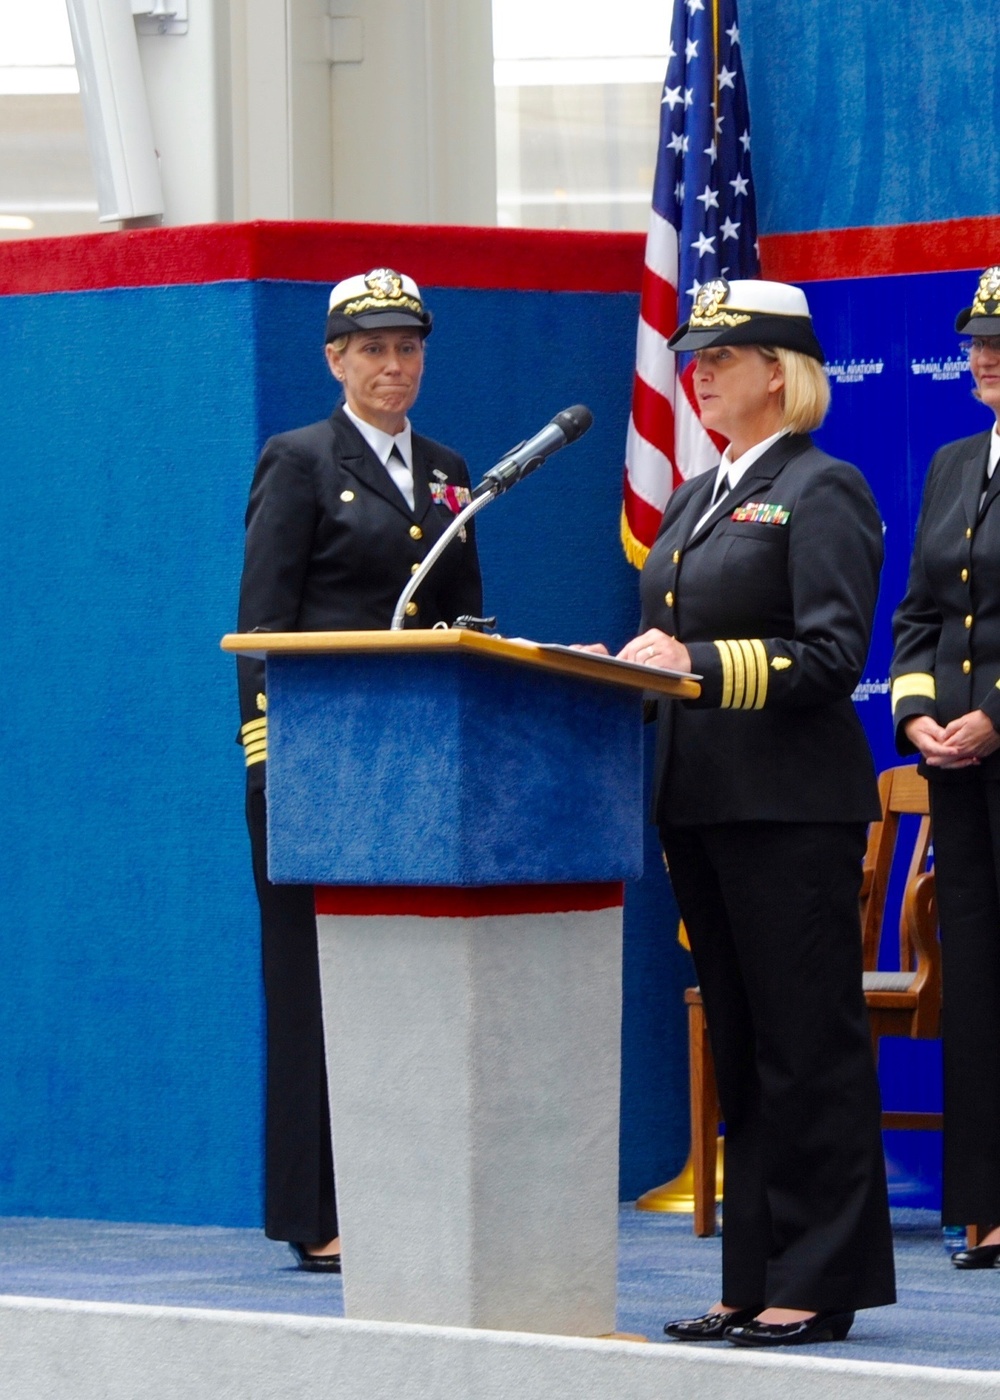 Change of Command for Naval Hospital Pensacola